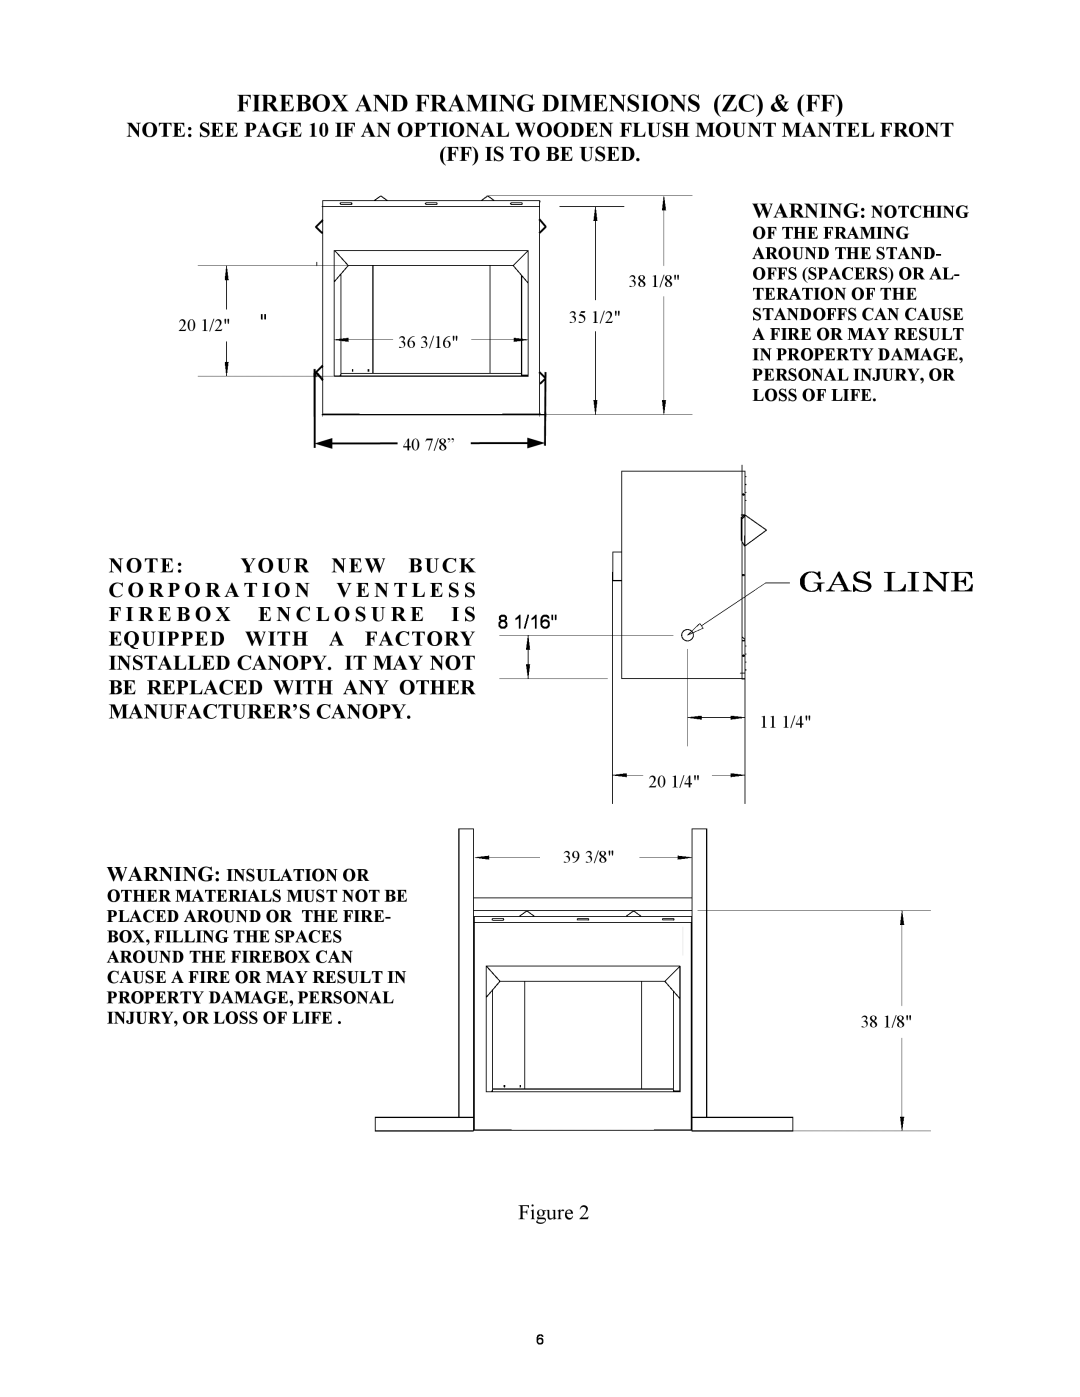 New Buck Corporation ZCBB dimensions Firebox And Framing Dimensions Zc & Ff, Gas Line 